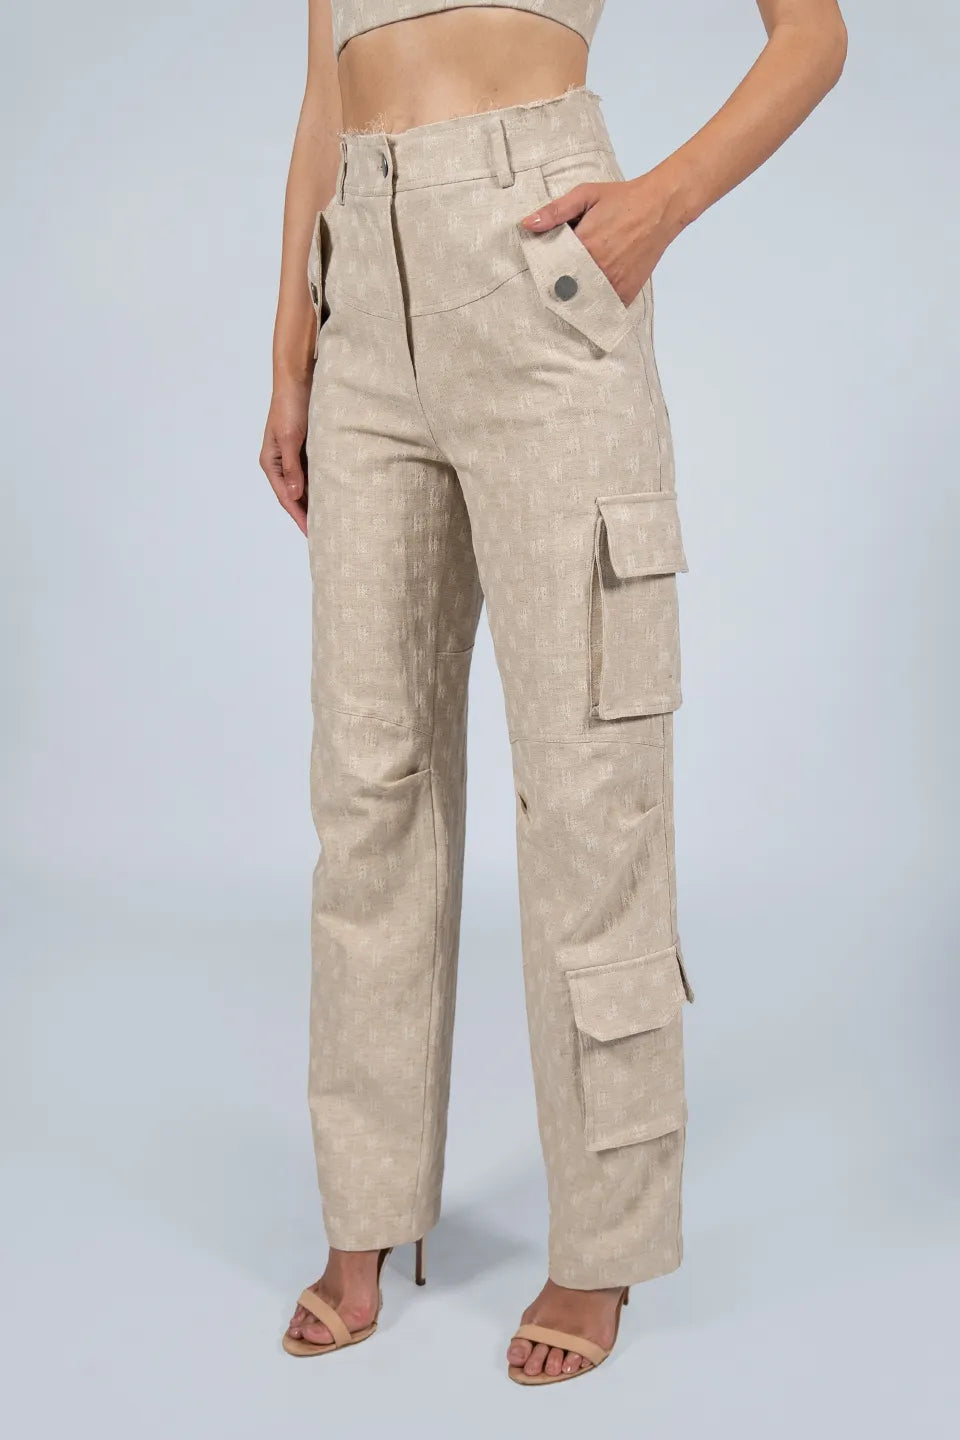 Designer Beige Women pants, shop online with free delivery in UAE. Product gallery 3